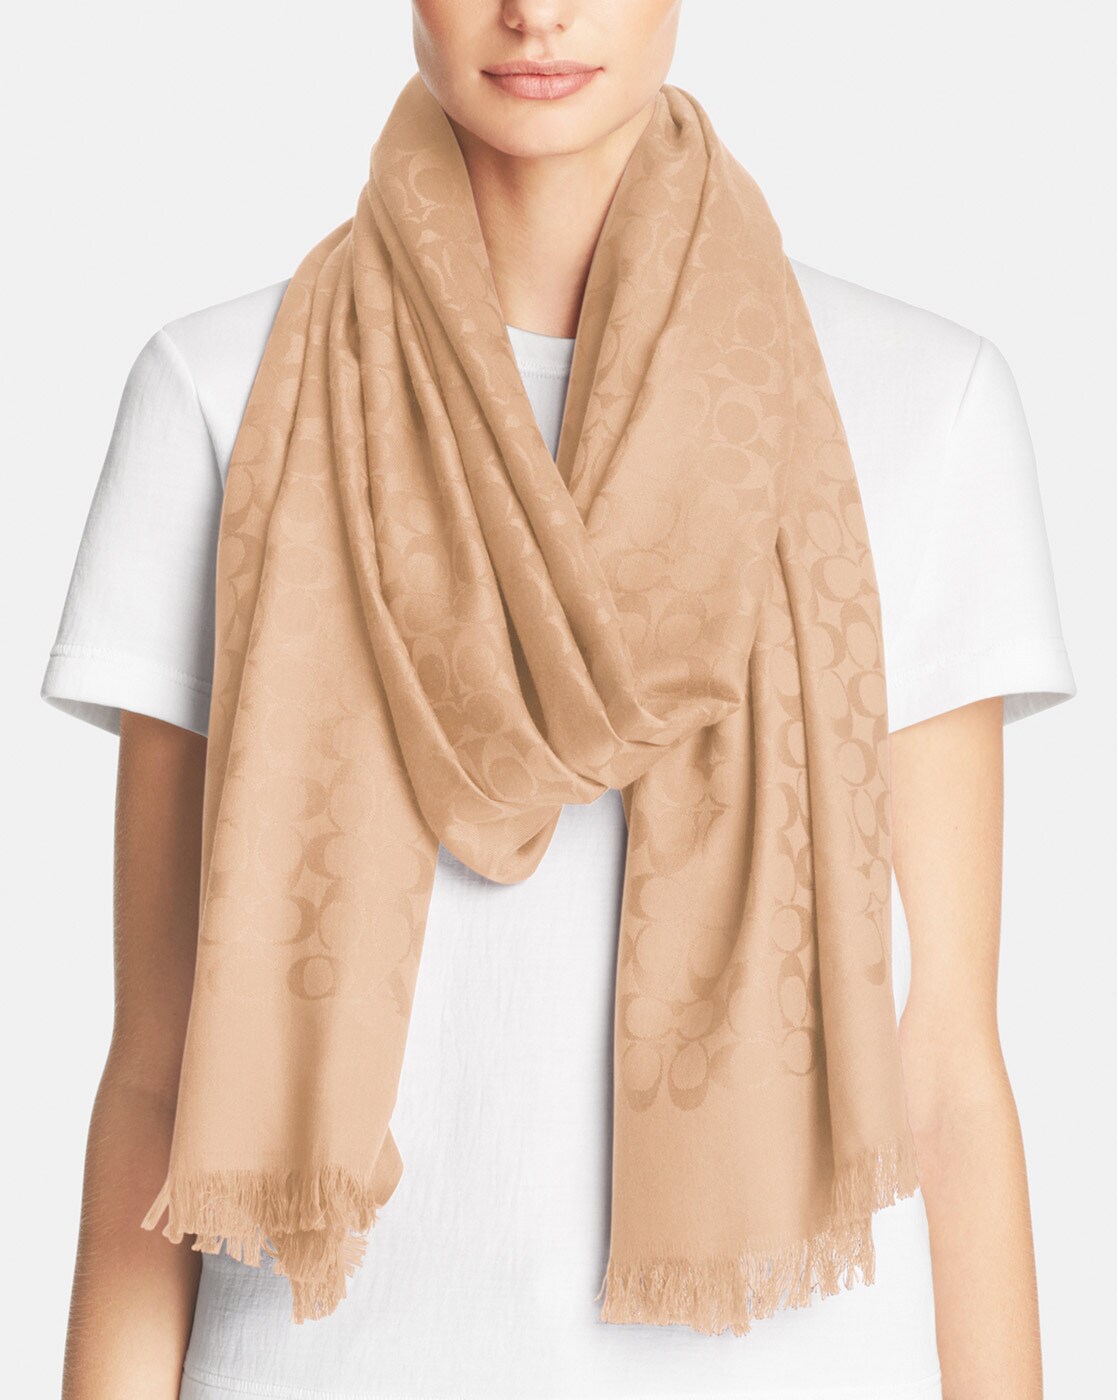 KHĂN CHOÀNG CỔ COACH CHAMPAGNE SIGNATURE TEXTURED STOLE WITH TASSELS 3